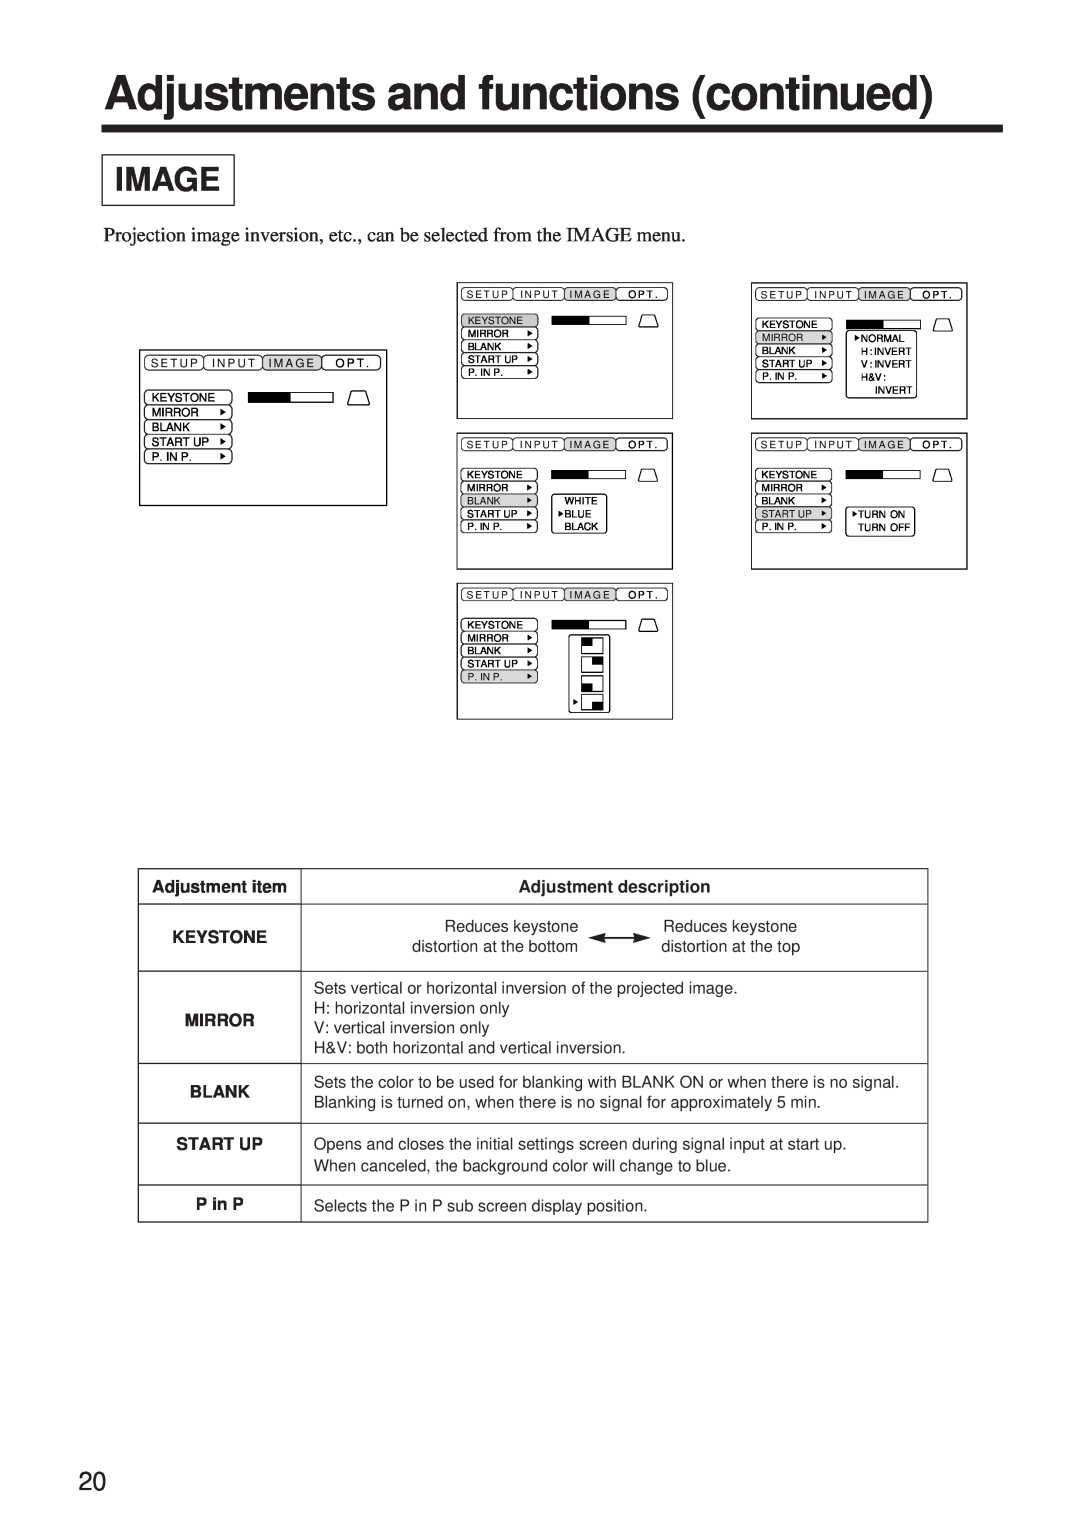 BOXLIGHT MP-650i user manual Image, Adjustments and functions continued, Mirror, Start Up, P in P 